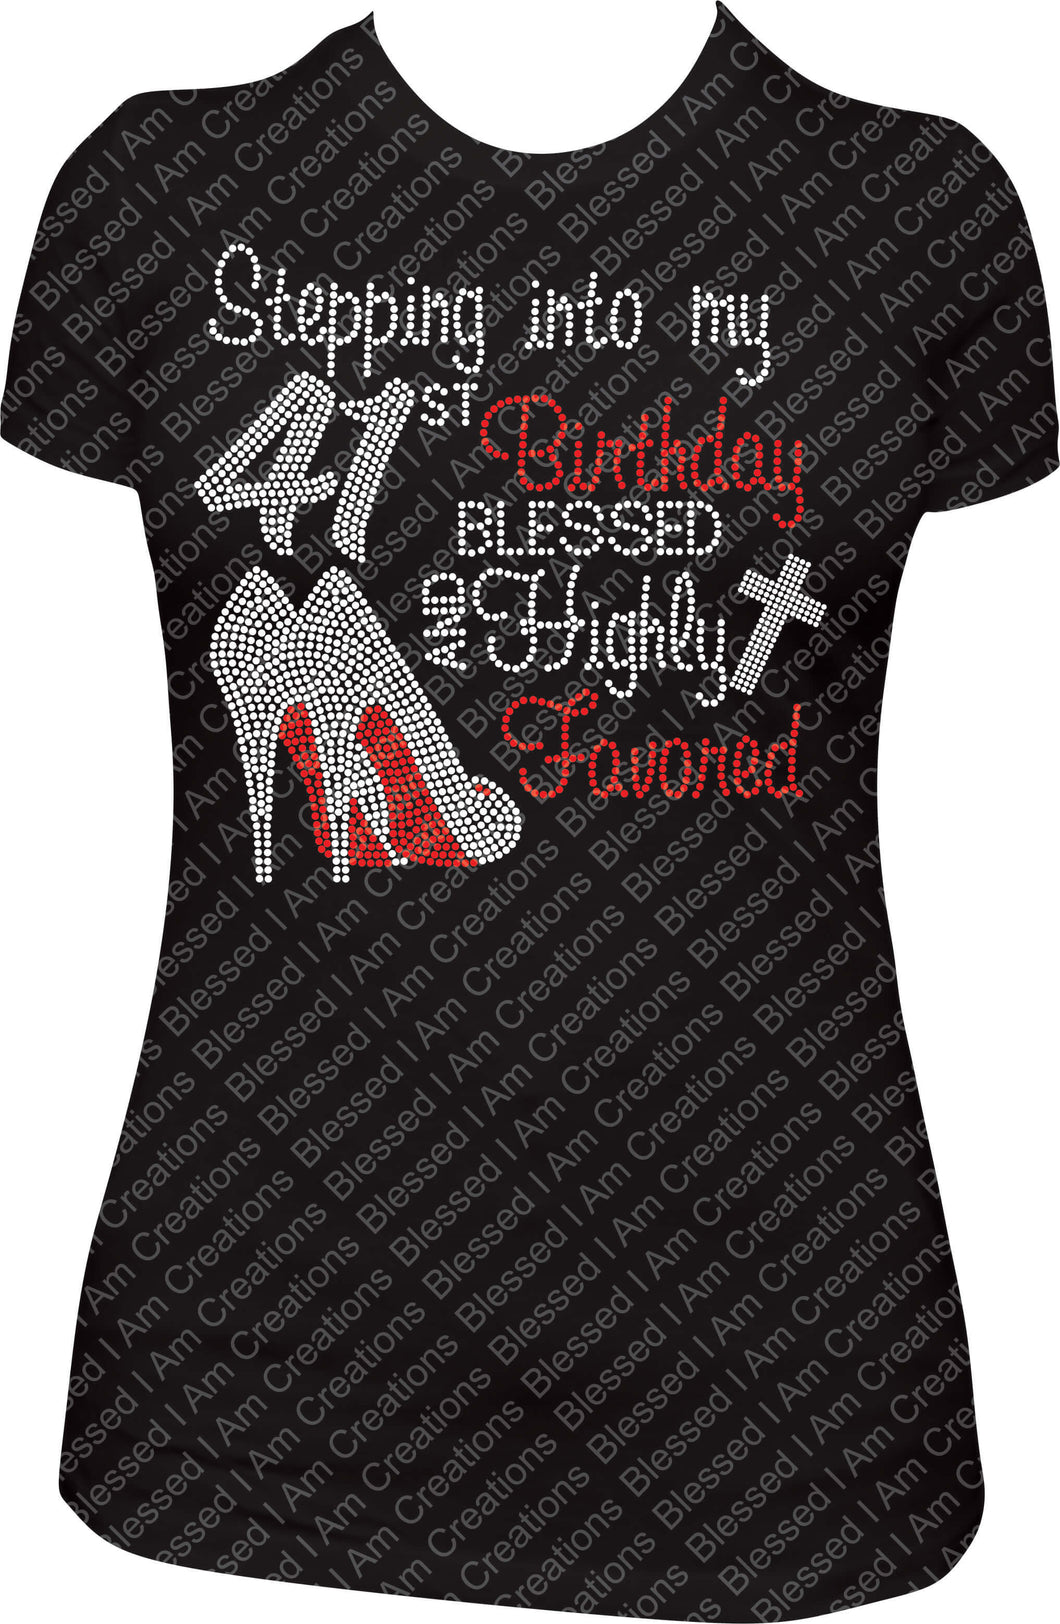 Stepping into my 41st Birthday Blessed and Highly Favored Rhinestone Birthday Shirt